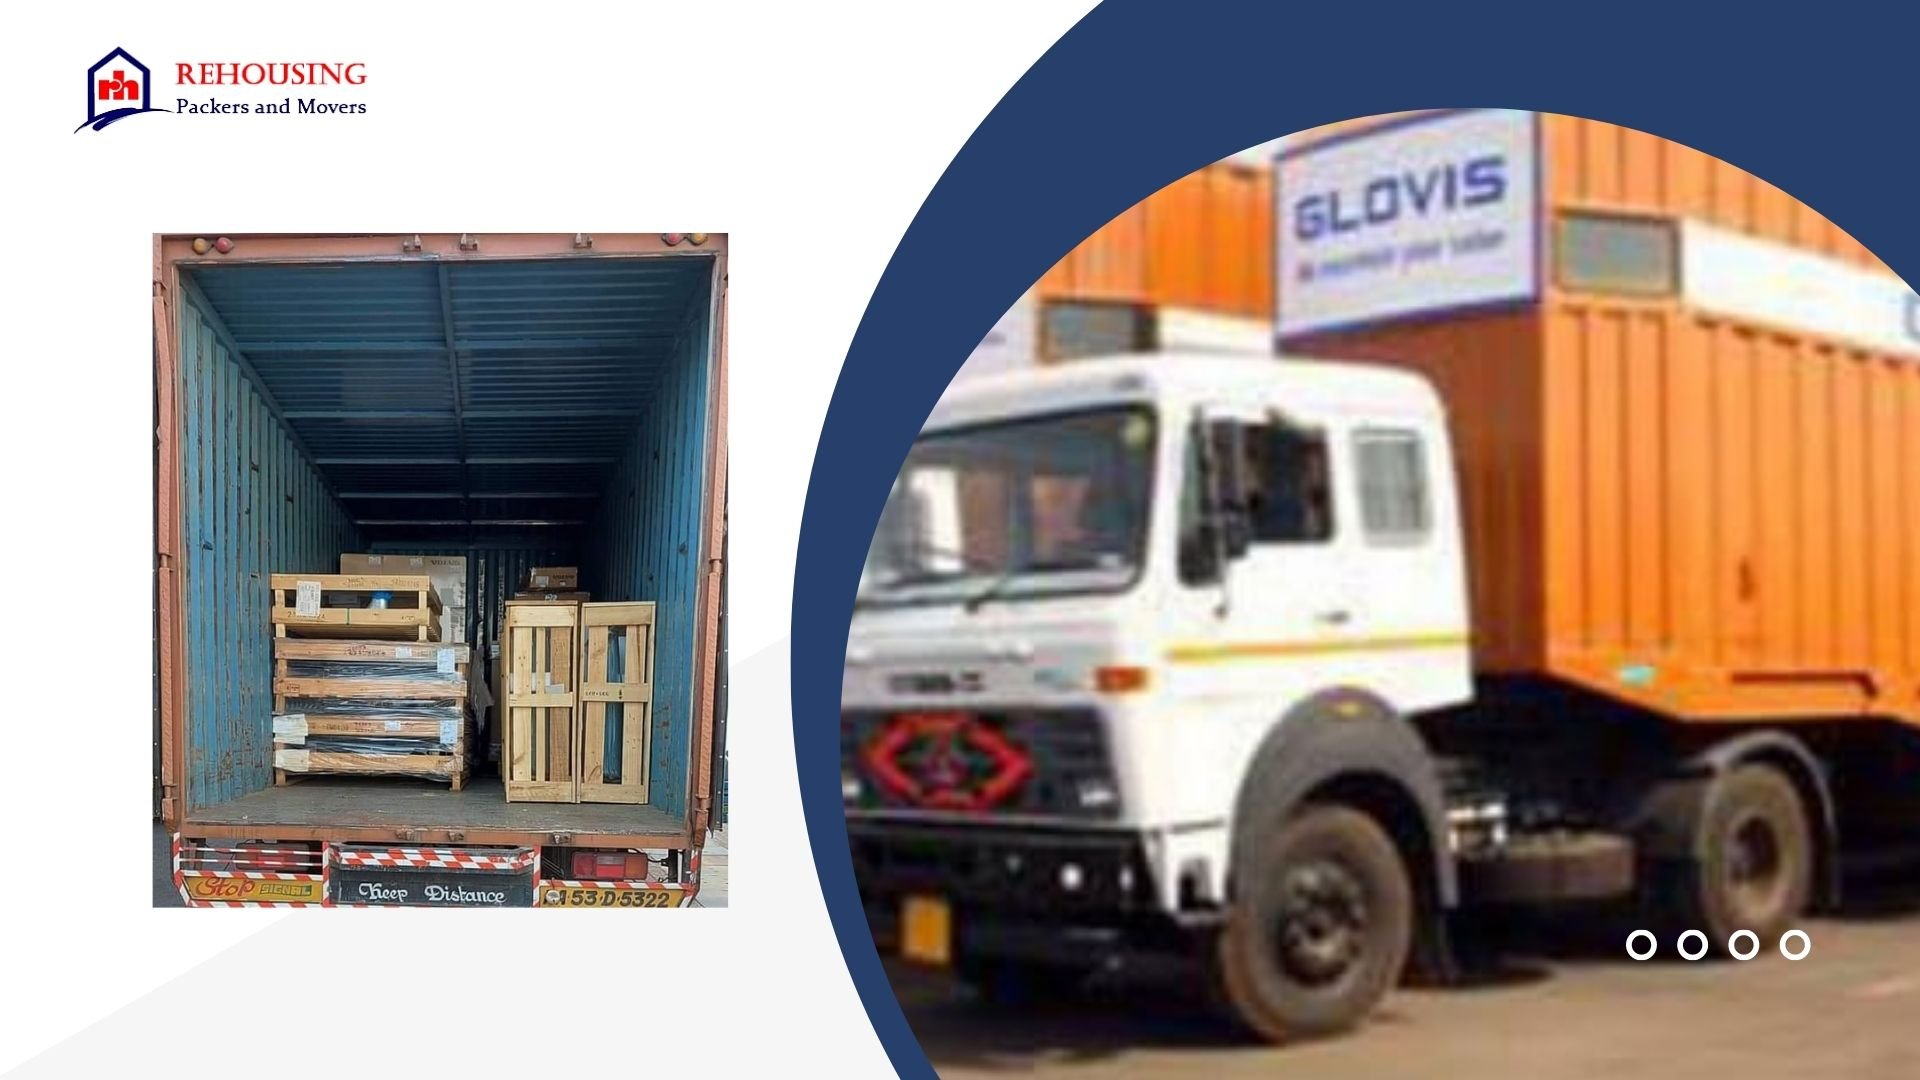 Packers and Movers From Dehradun to Siliguri | Rehousing packers and movers